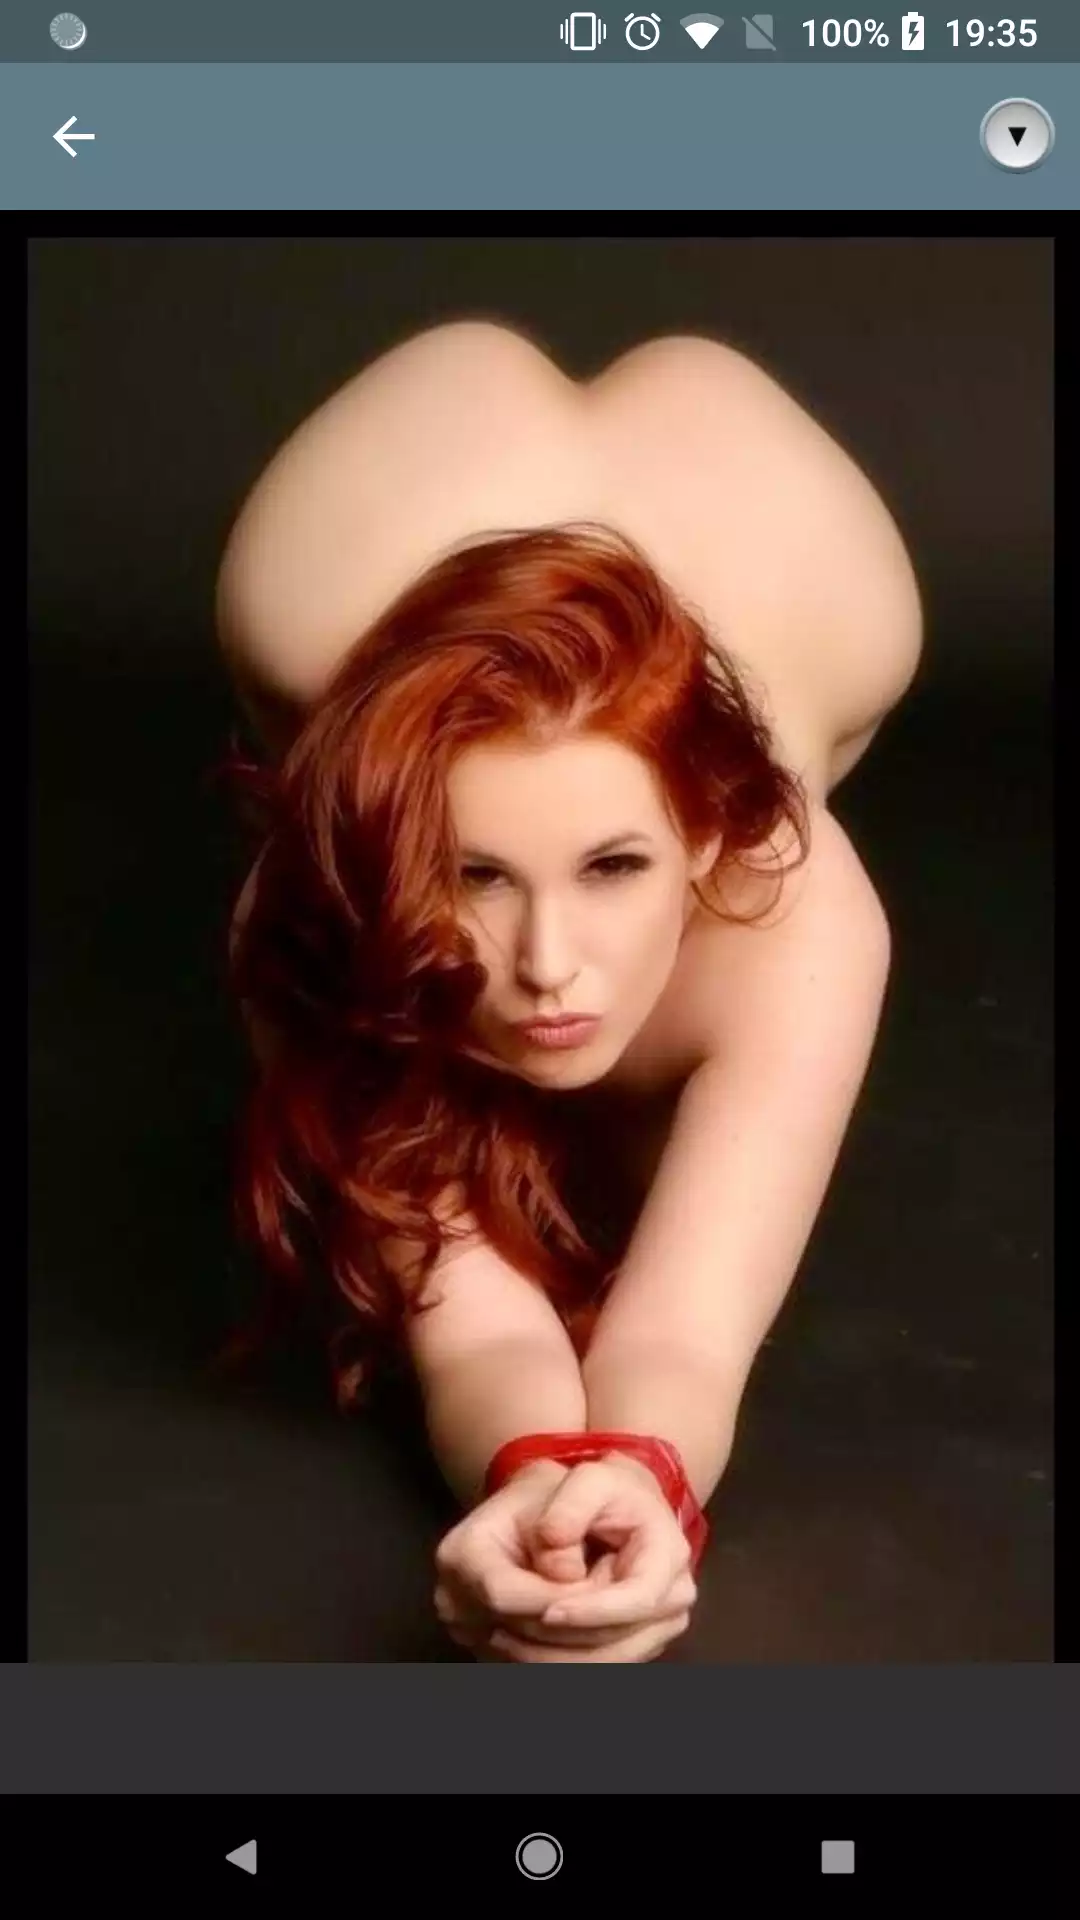 Sexy Redhead pics gomez,pics,photos,porn,redhead,best,pornstar,amateurs,daily,wallpapers,android,for,sexy,titty,apps,gallery,esperanza,apk,photo,anime,pictures,immage,hentai